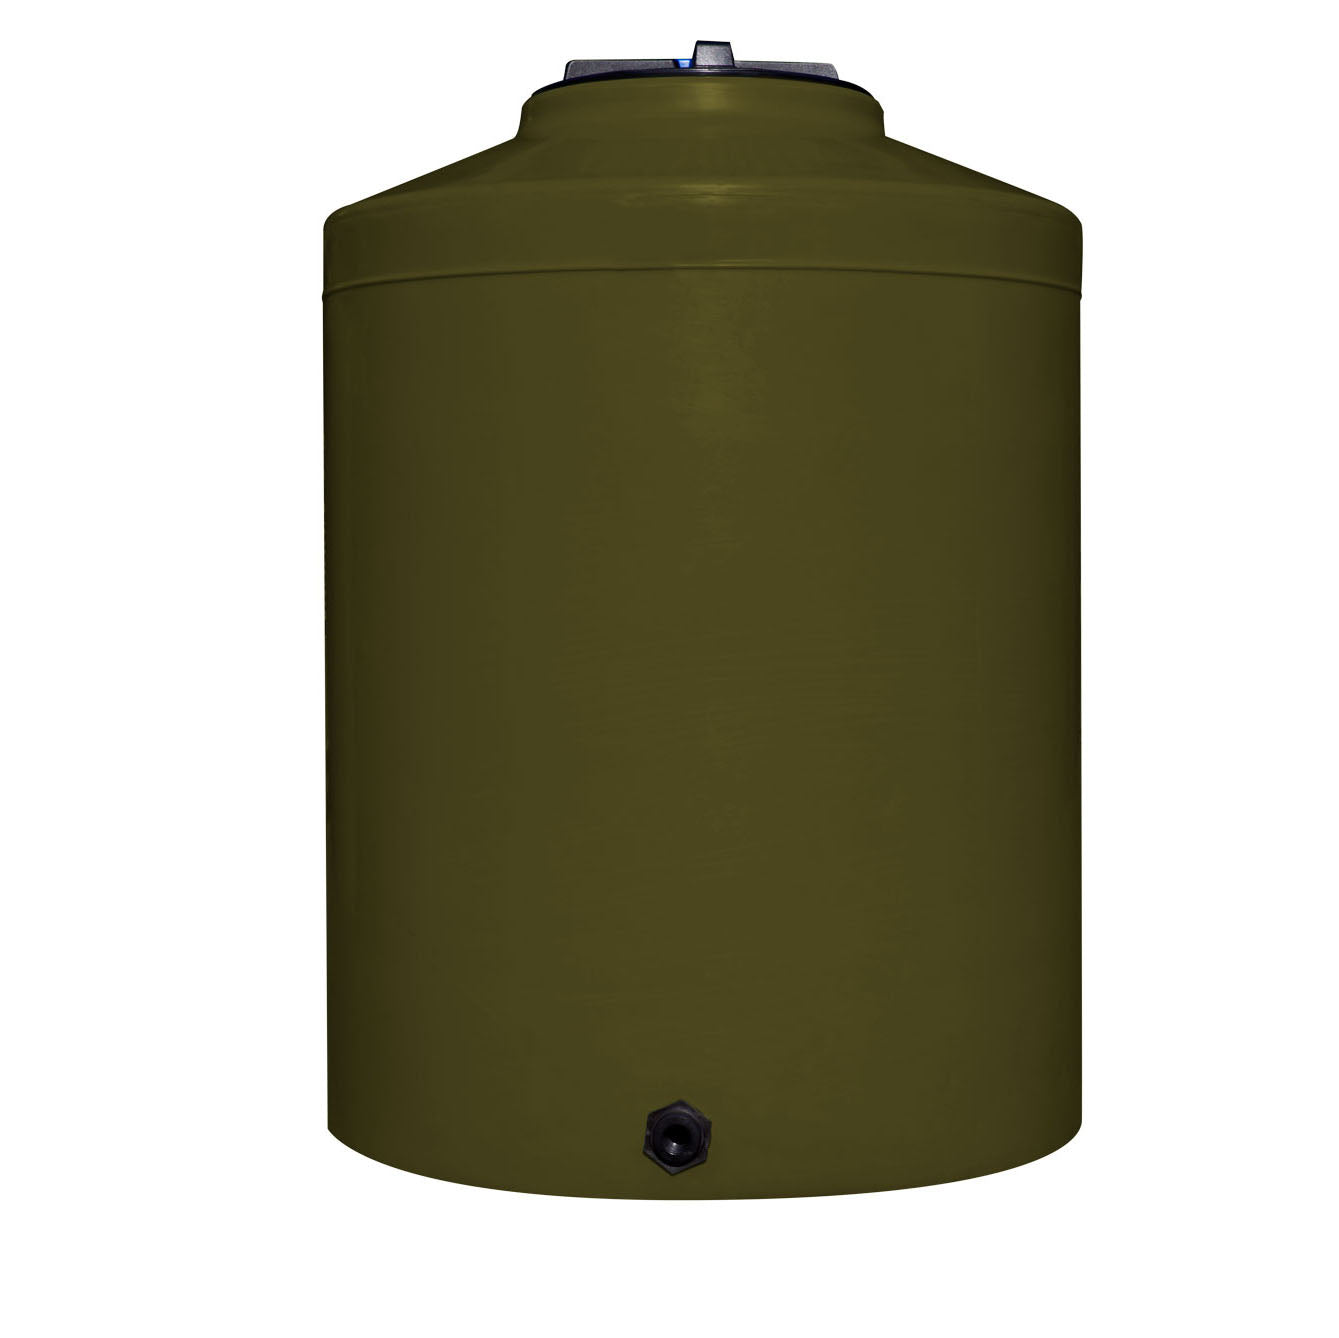 Bailey 900L bronze olive water tank